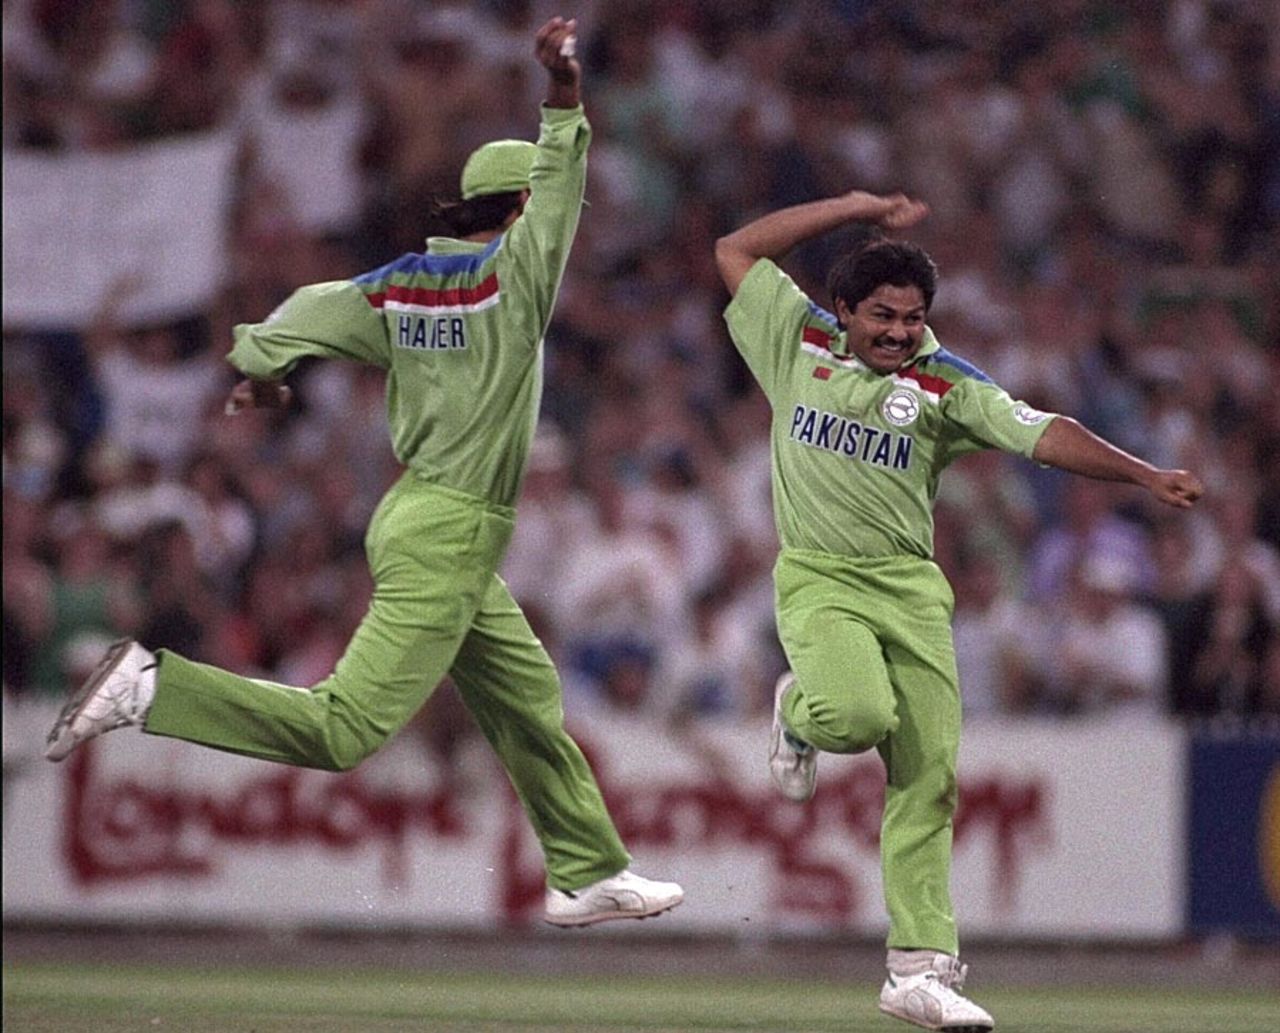 Mushtaq Ahmed celebrates a wicket, England v Pakistan, World Cup final, Melbourne, March 25, 1992